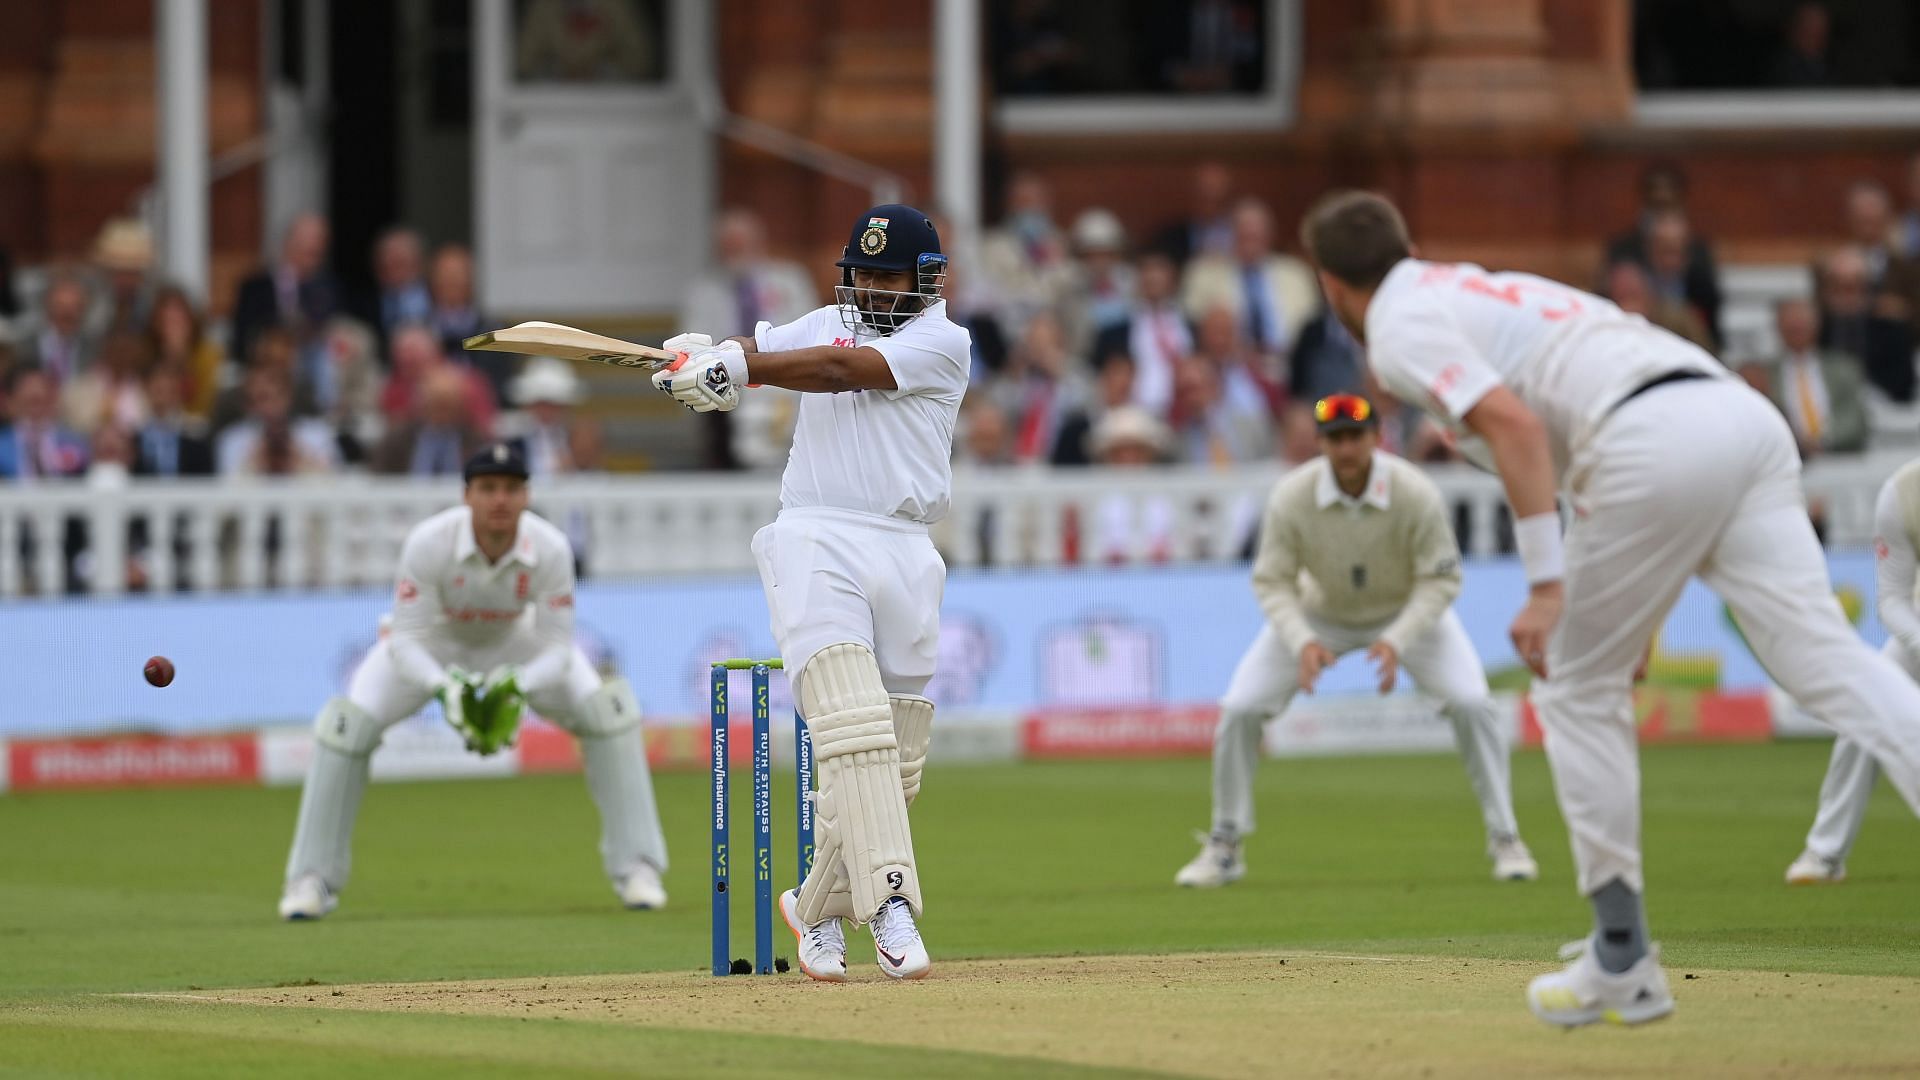 Rishabh Pant is the highest run scorer for India in tests in 2022